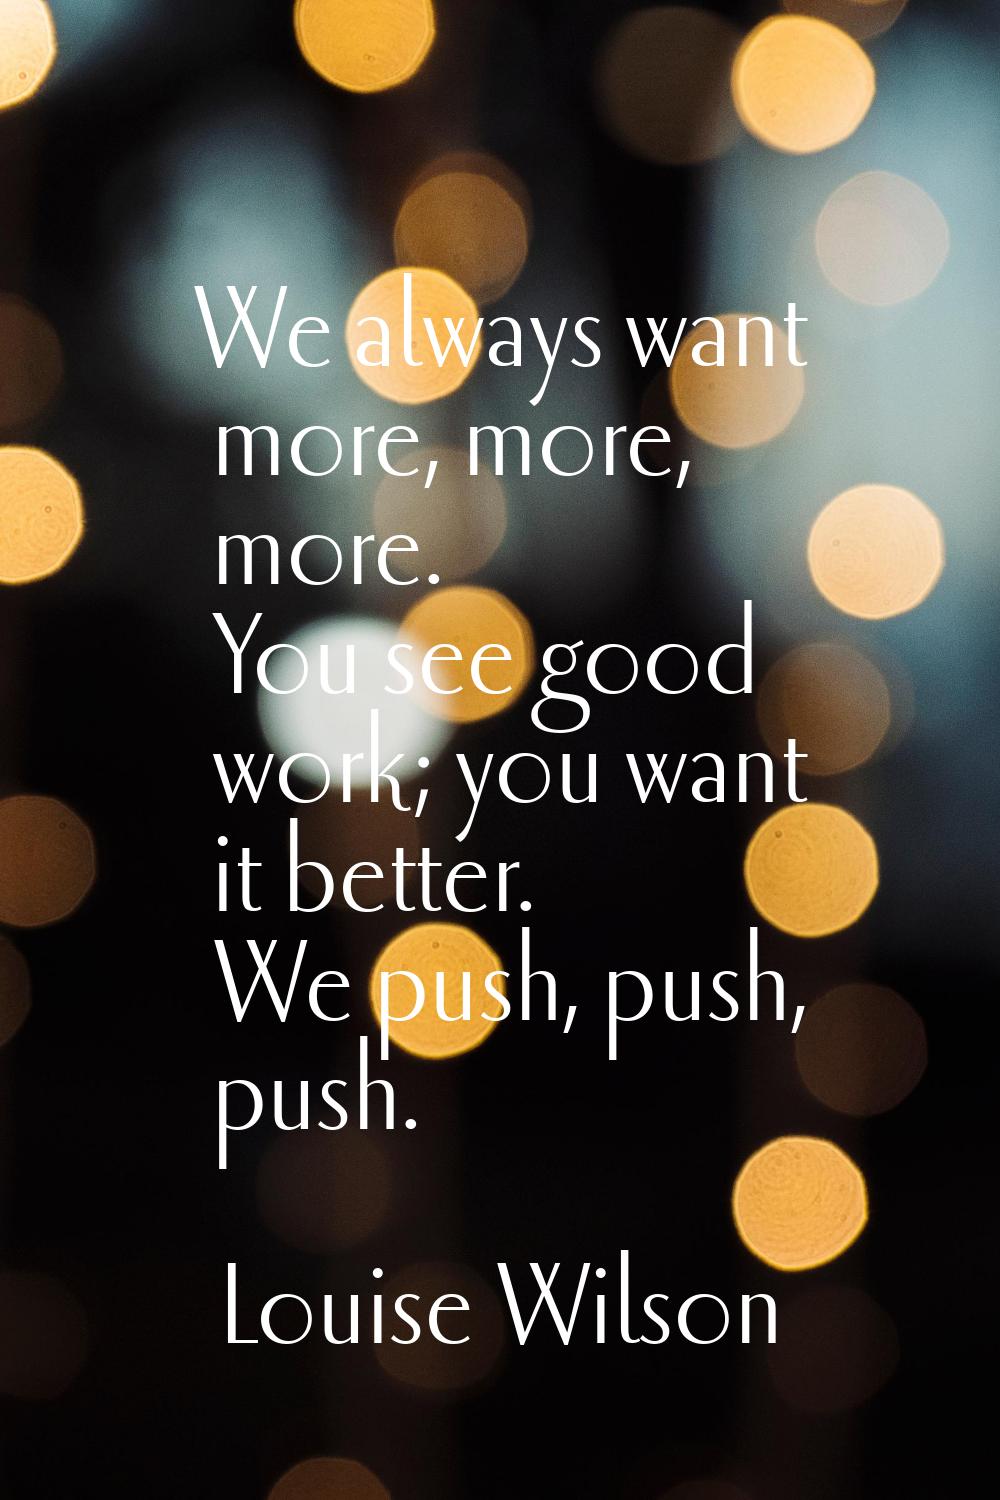 We always want more, more, more. You see good work; you want it better. We push, push, push.